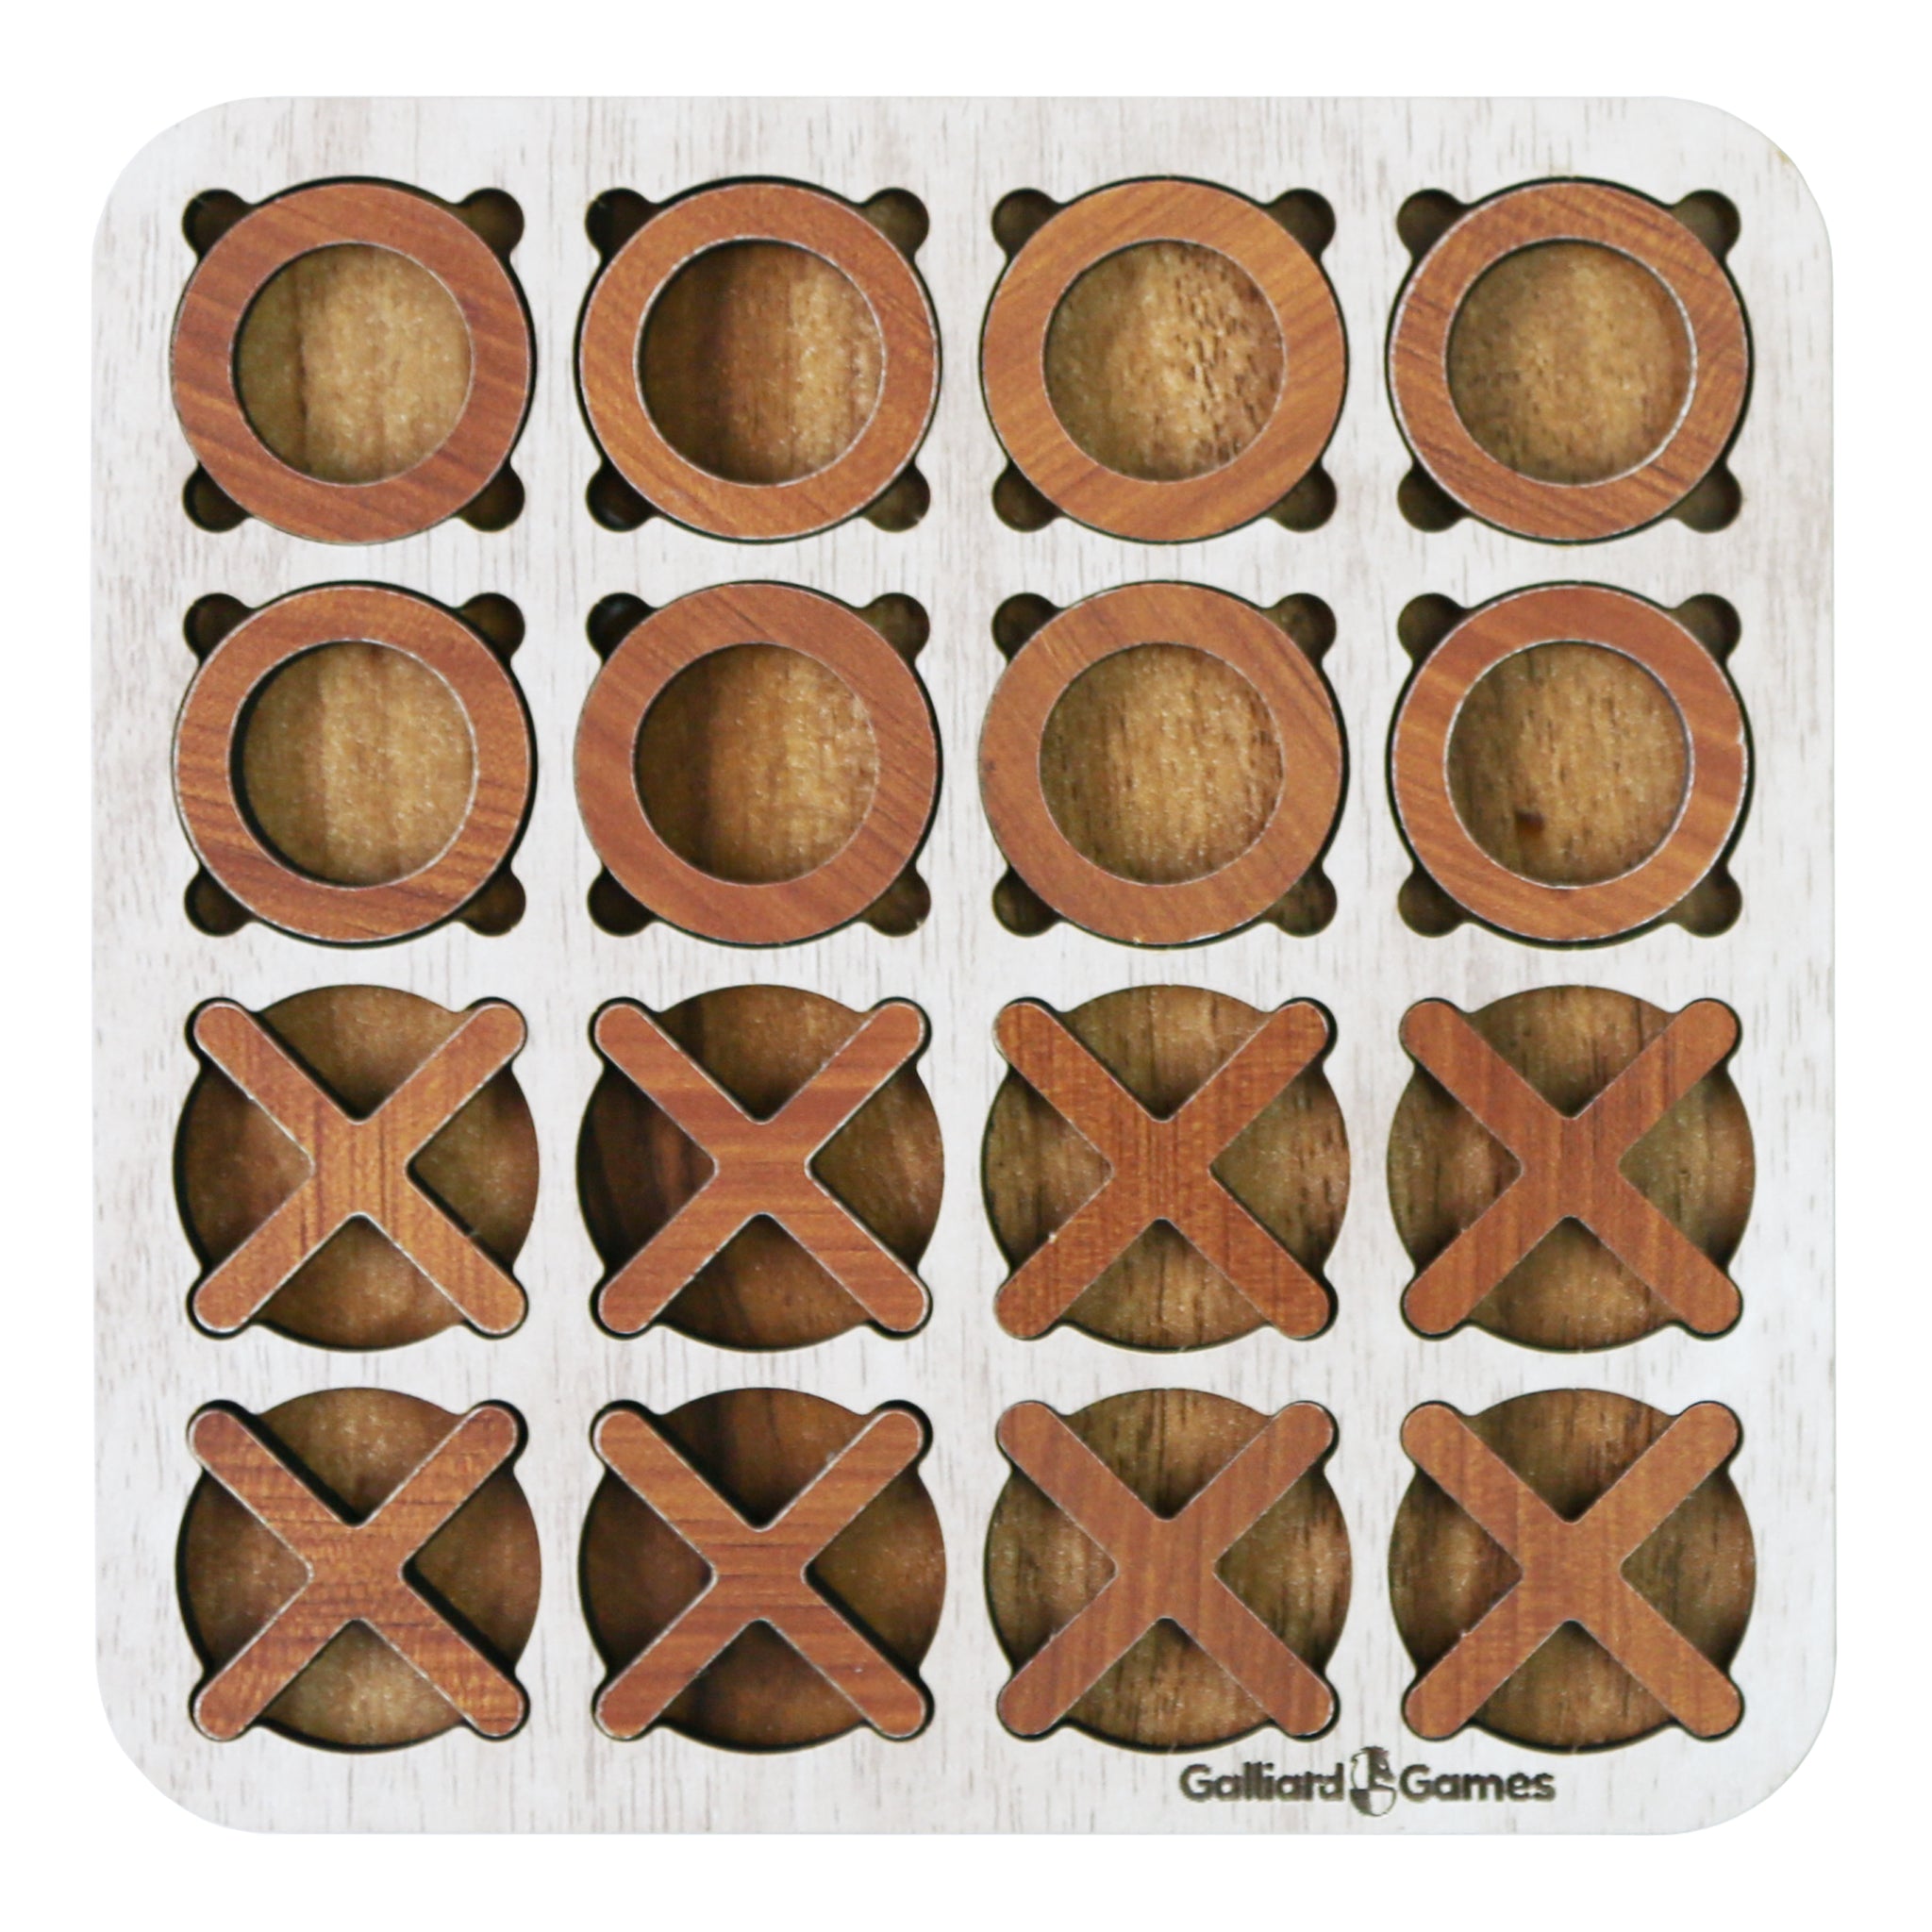 Tic Tac Toe Game Online ® - Play knots and crosses